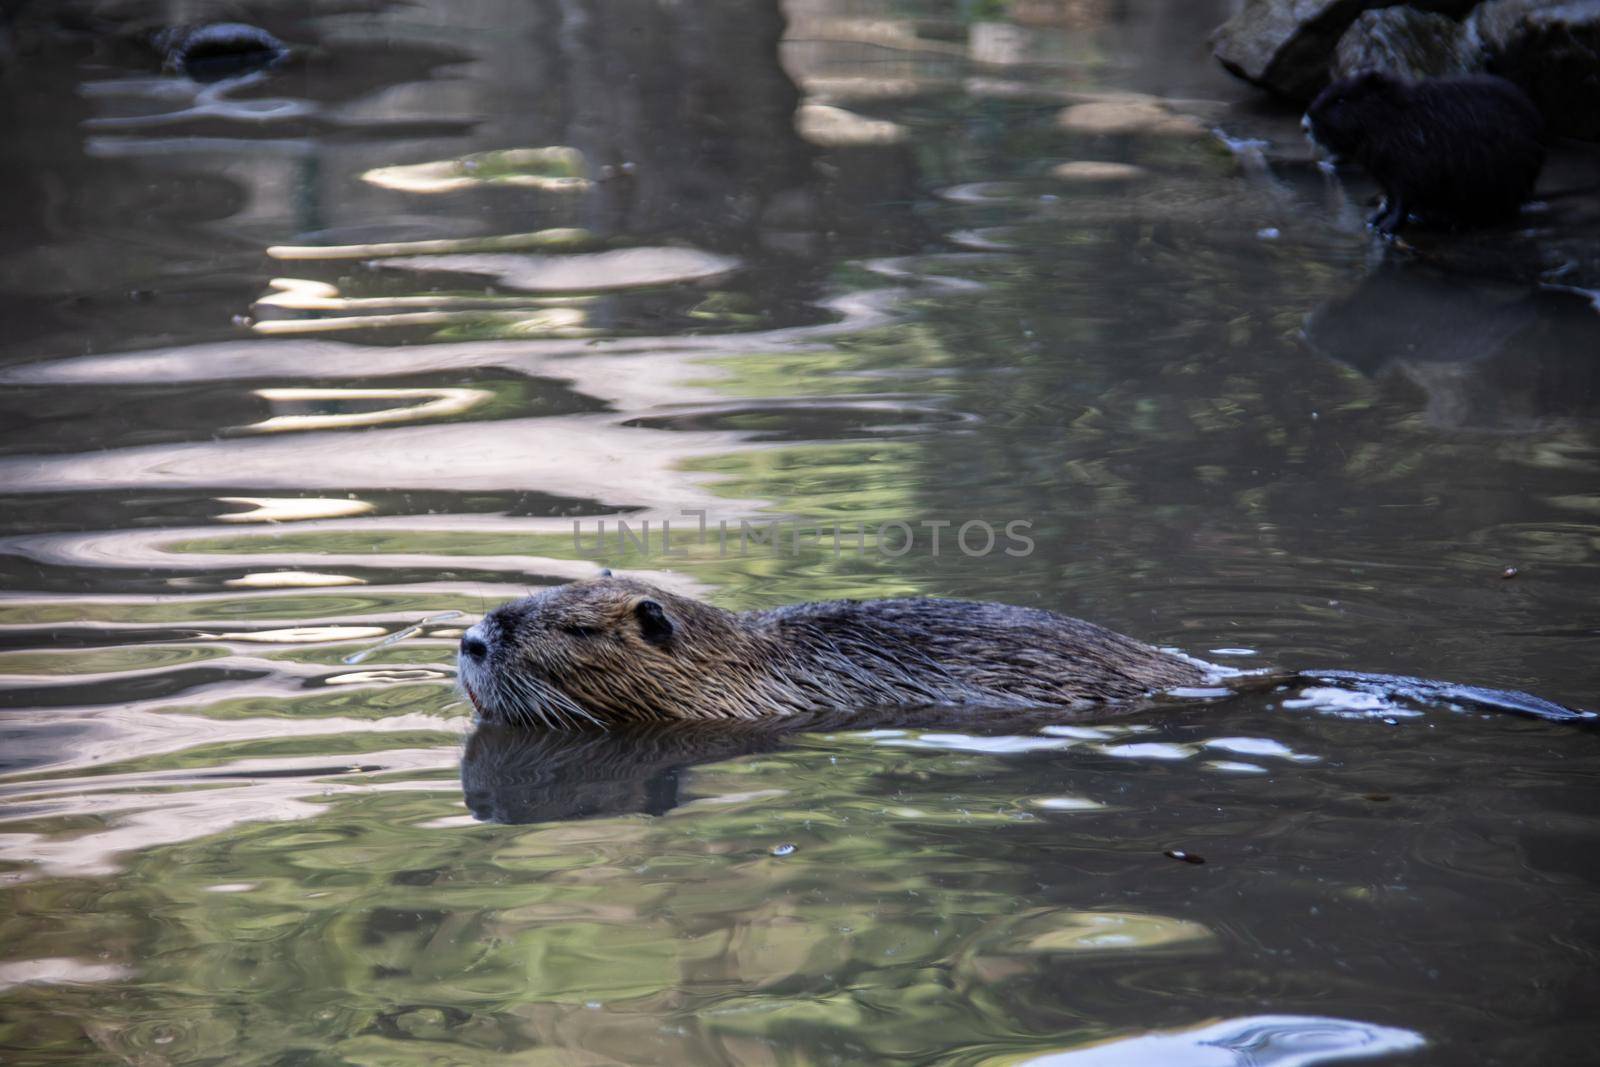 Nutria clean themselves by Dr-Lange